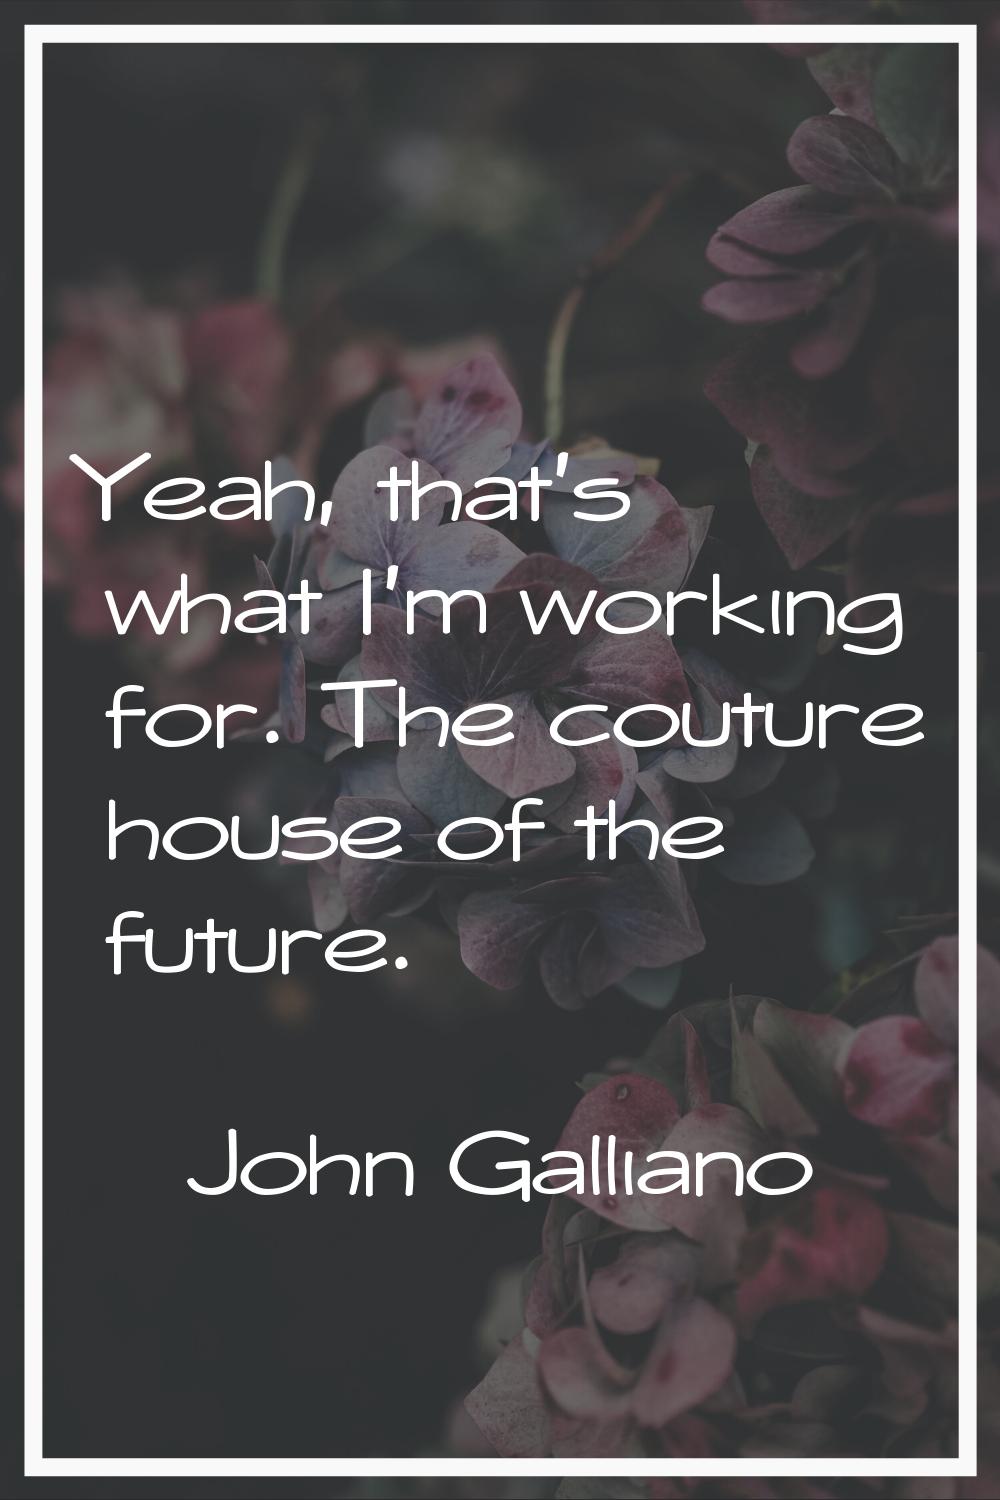 Yeah, that's what I'm working for. The couture house of the future.